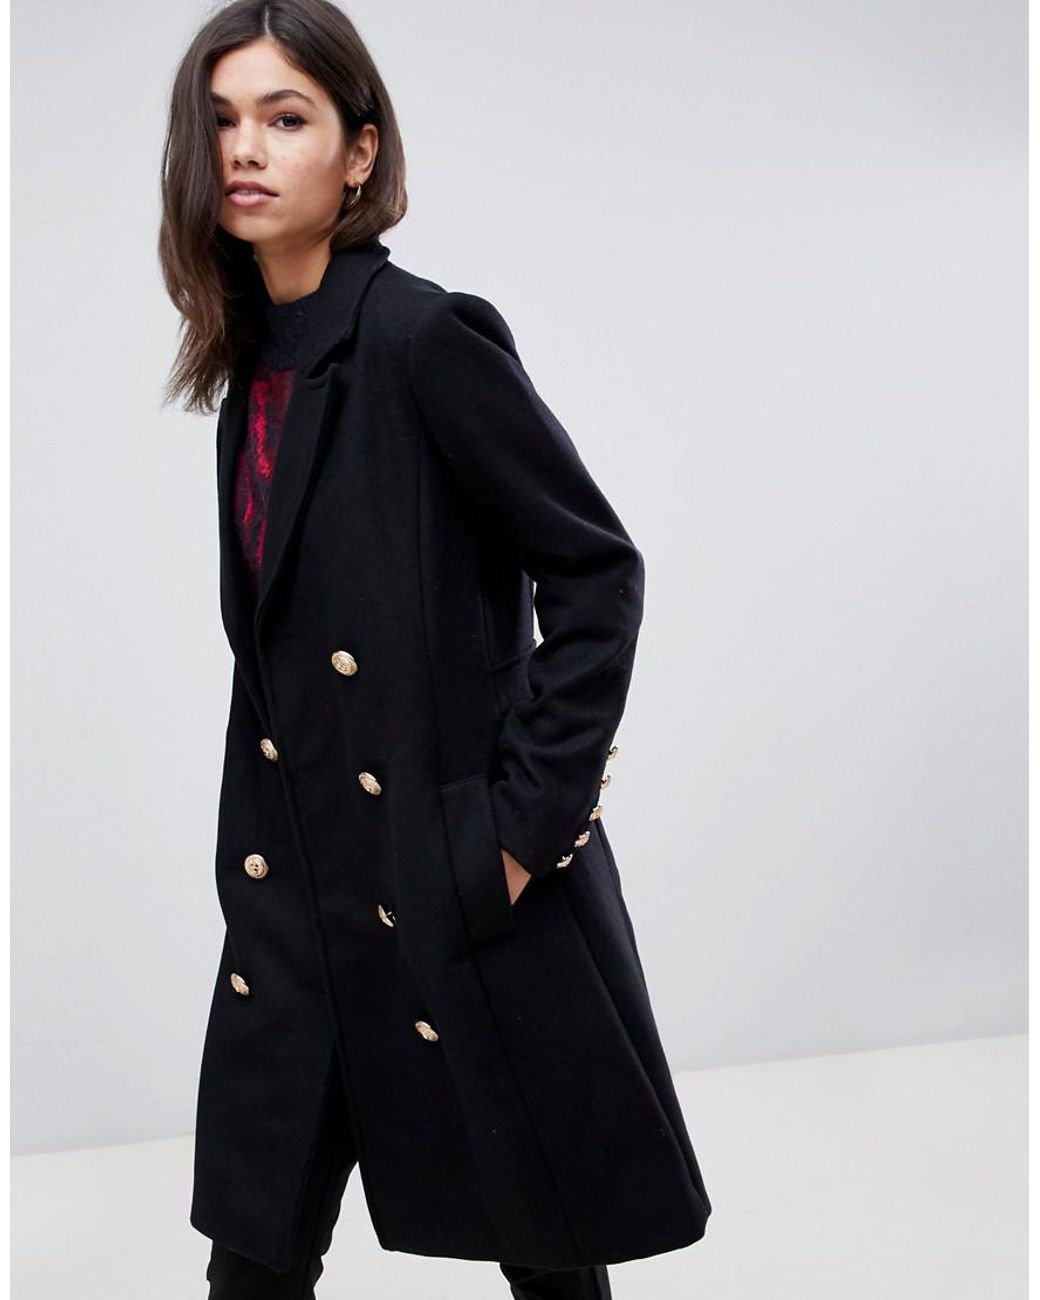 Y.A.S Gold Button Pea Coat in Black | Lyst